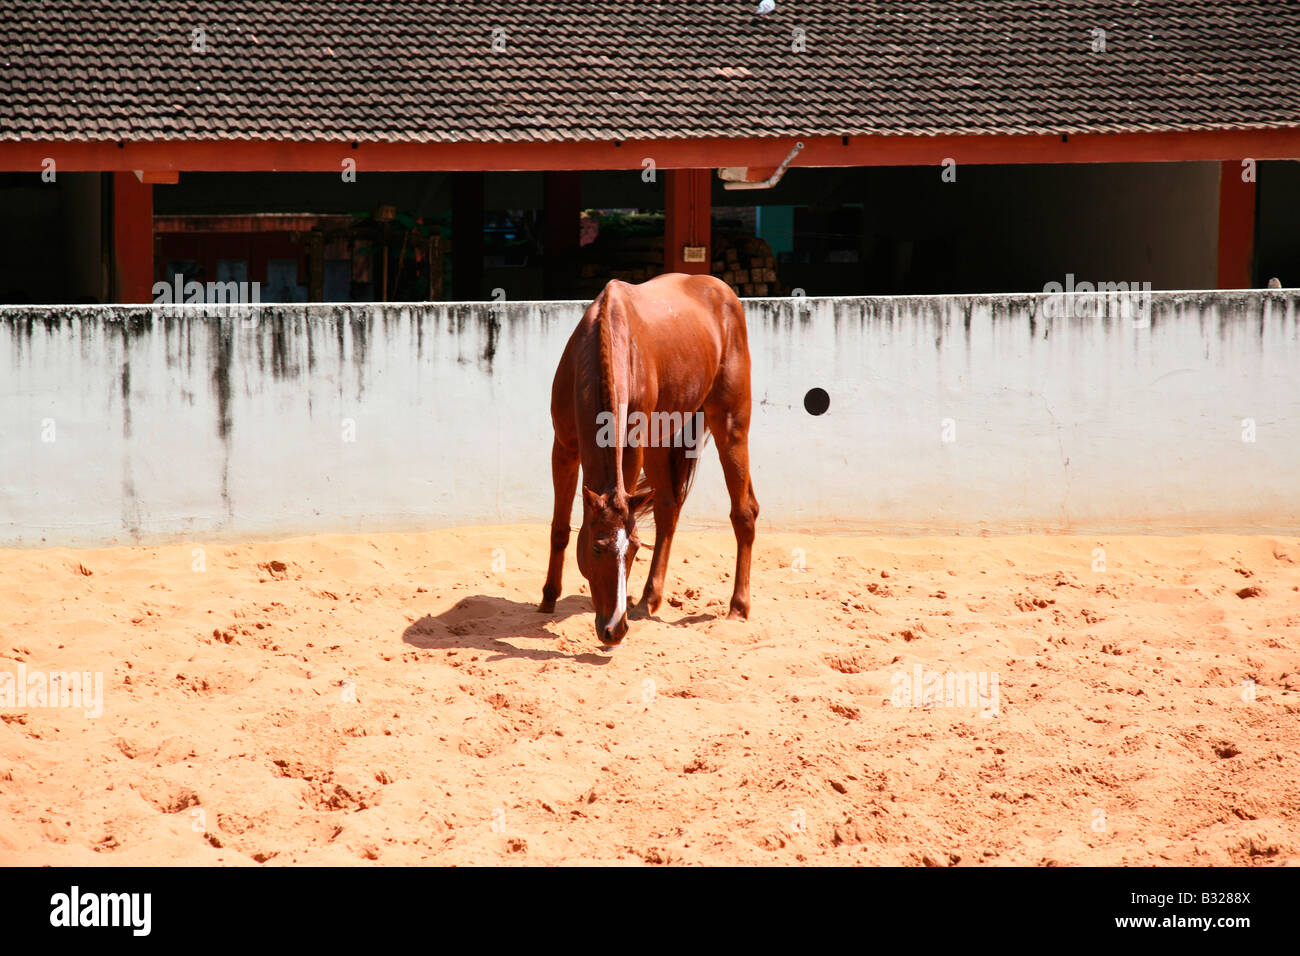 A horse in a riding school,india Stock Photo